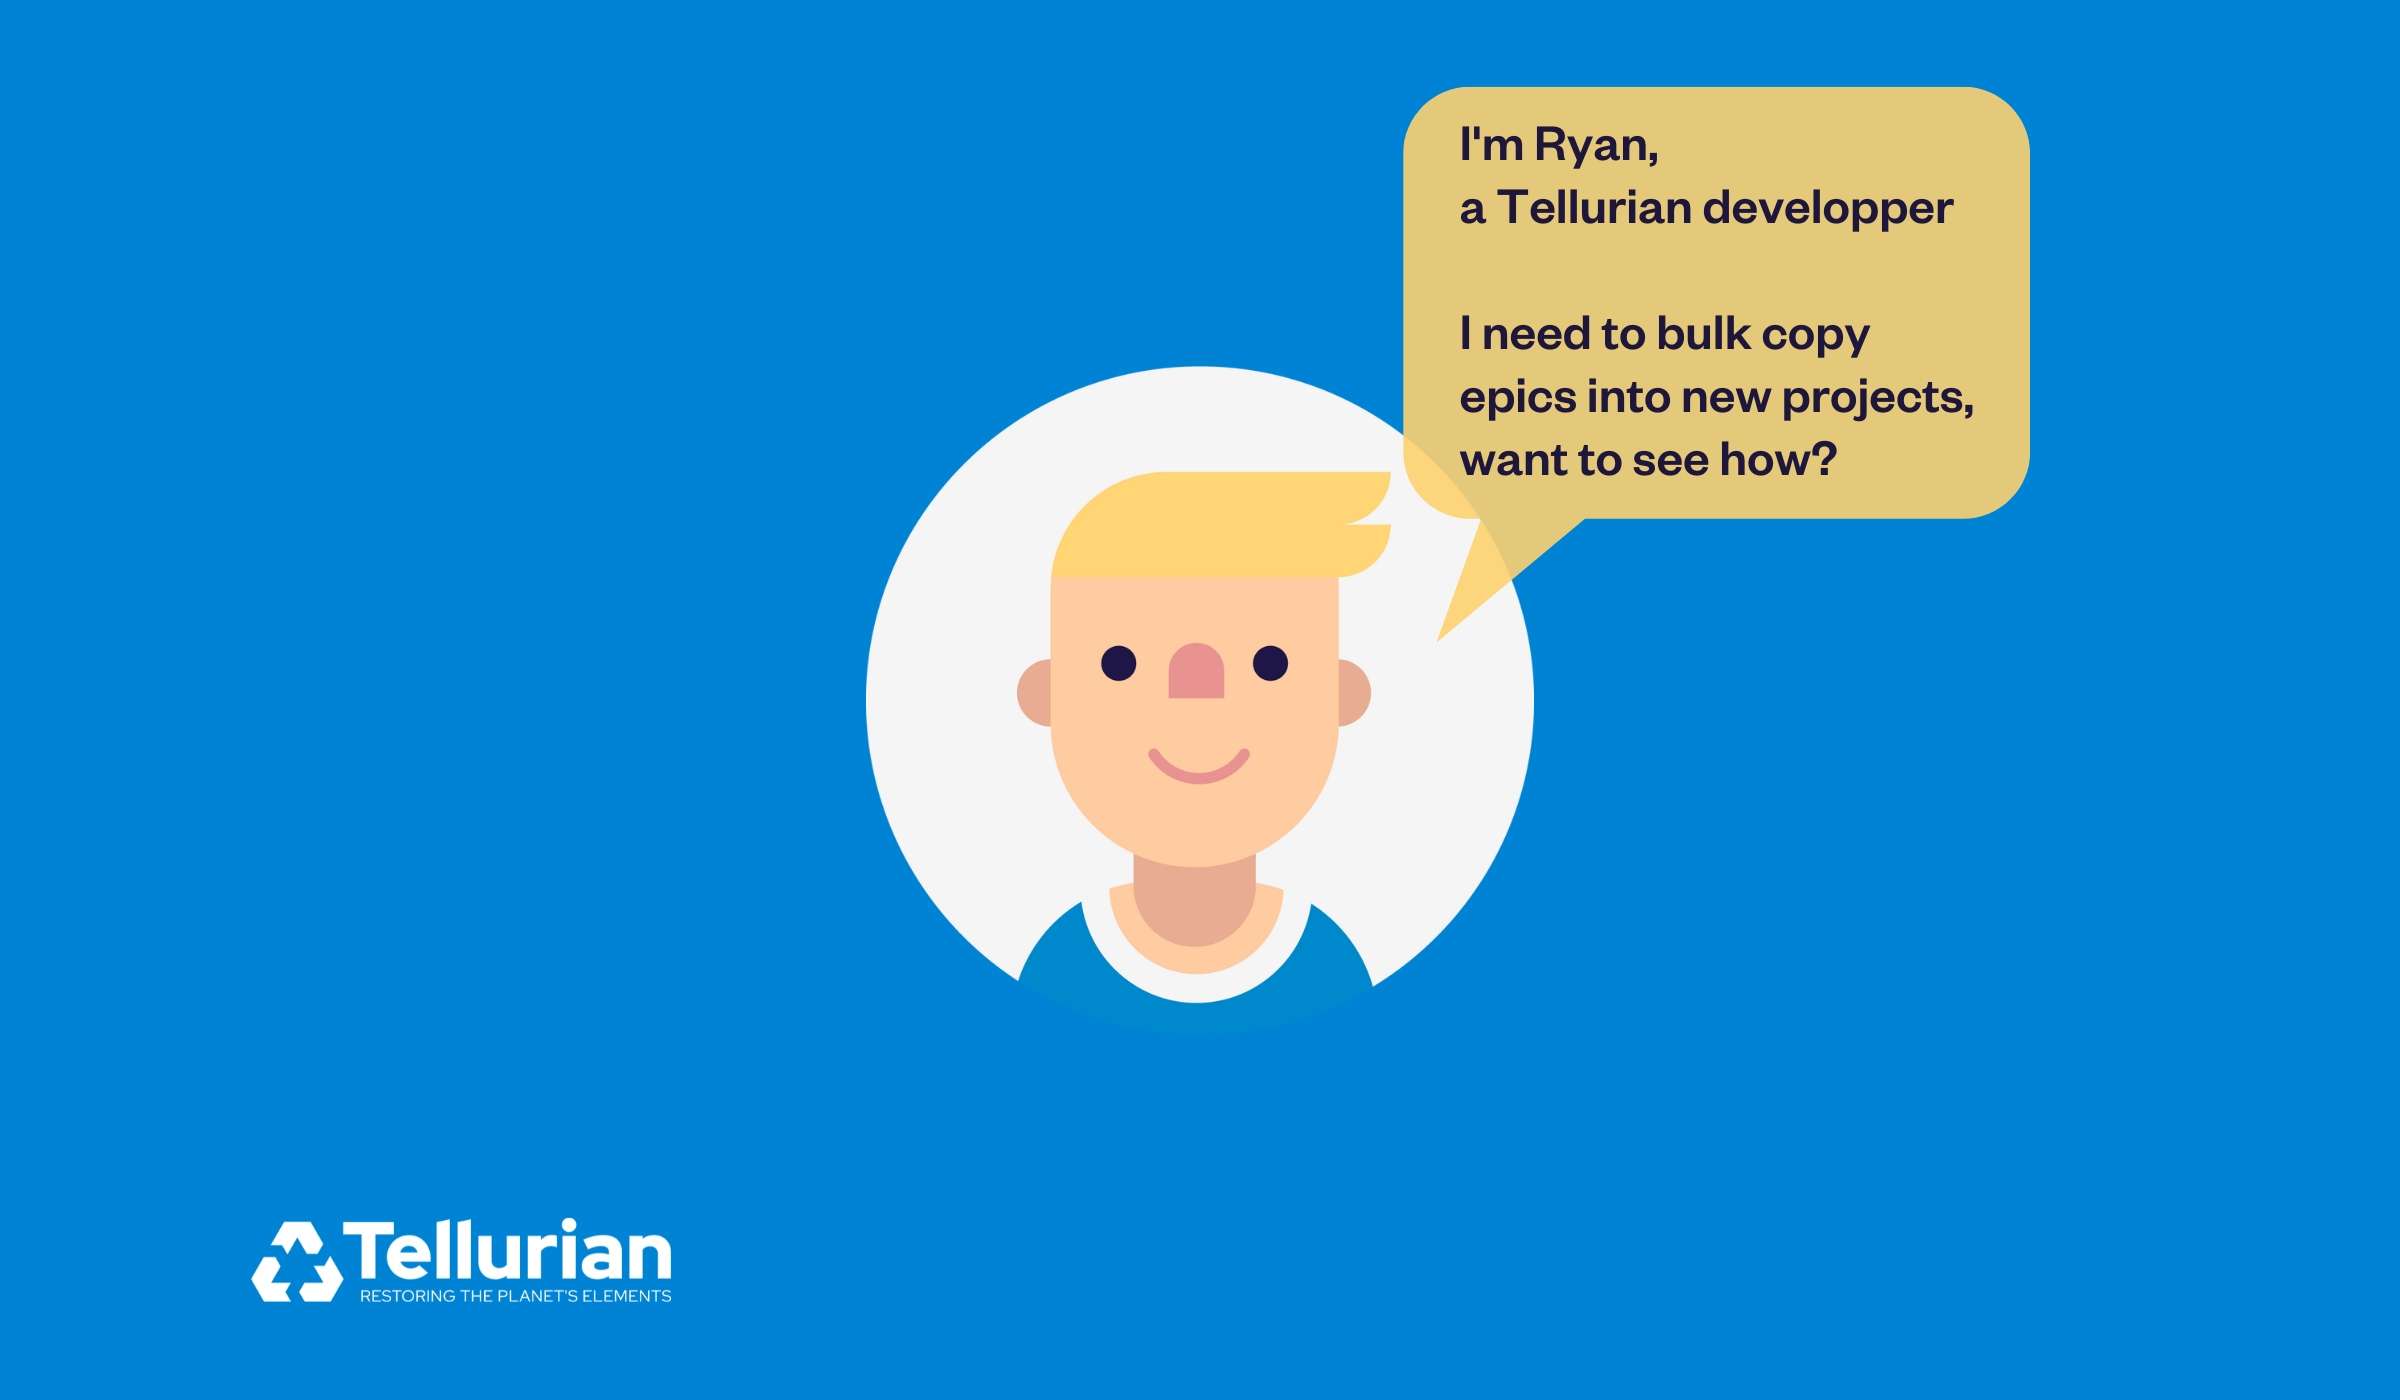 Meet Ryan! Ryan is a software developer and he works on new client projects regularly. He starts each project the same way, by creating the same set of Epics and tasks in Jira. By using Elements Copy & Sync, he can automate this initialization process.